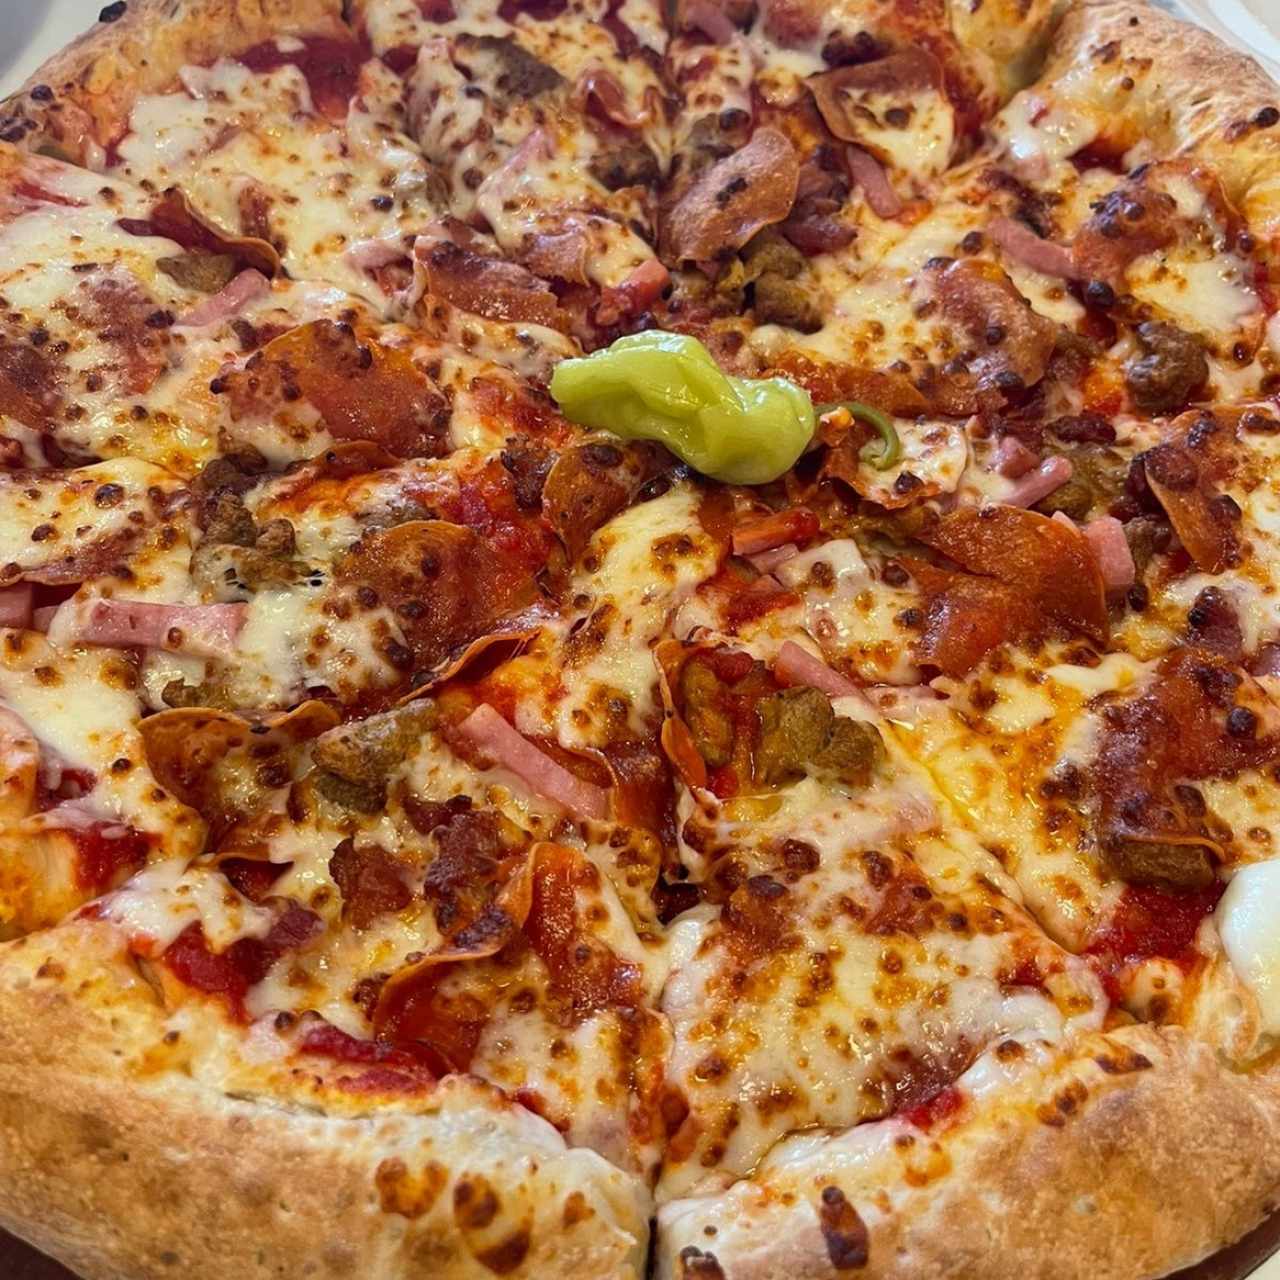 Pizzas - All The Meats